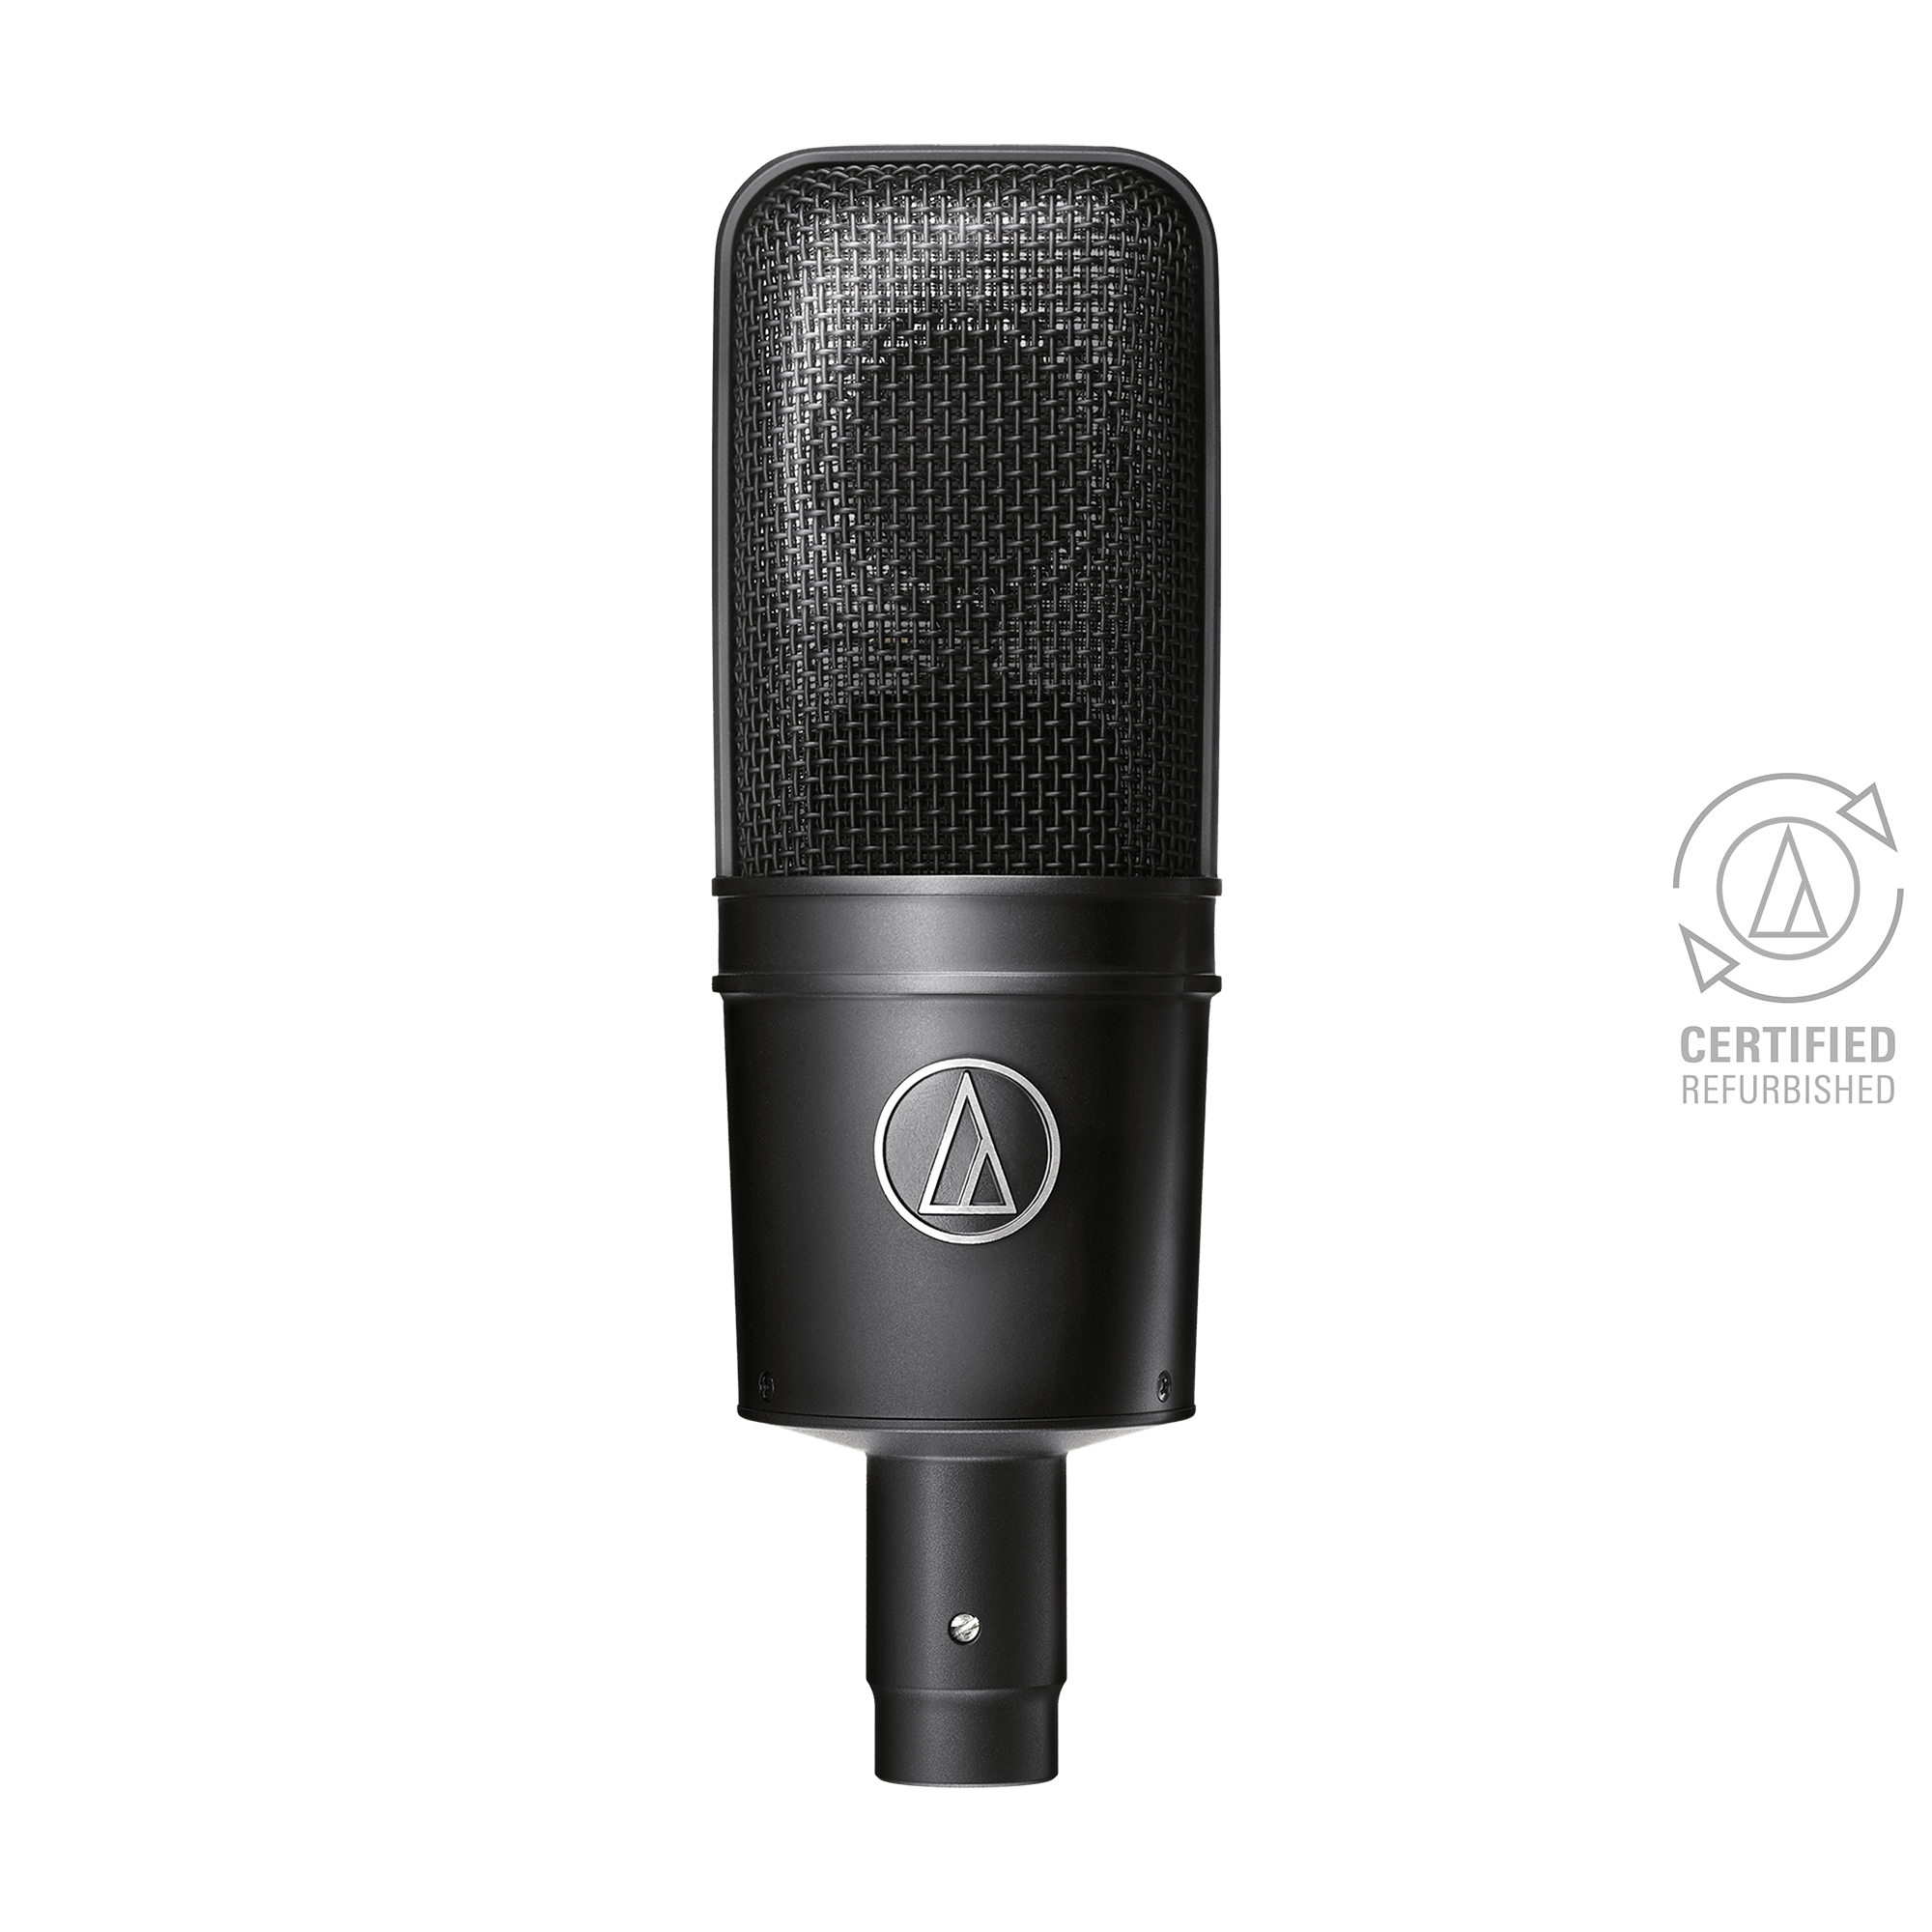 AT4040-CR Cardioid Condenser Microphone, Certified Refurbished